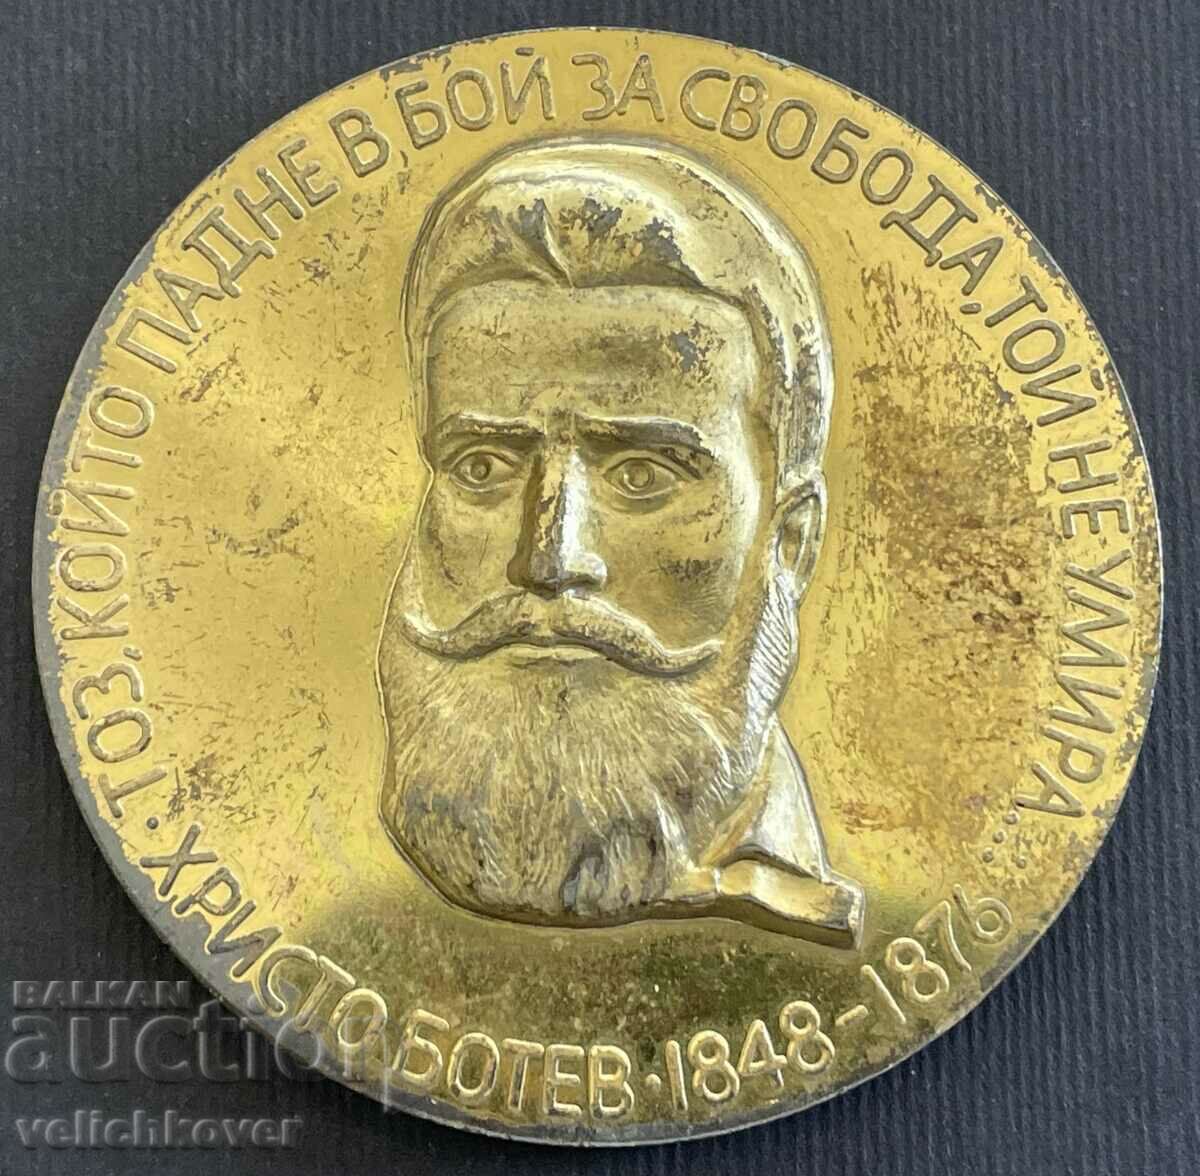 36976 Bulgaria plaque 90 years From the death of Hristo Botev Radetsky